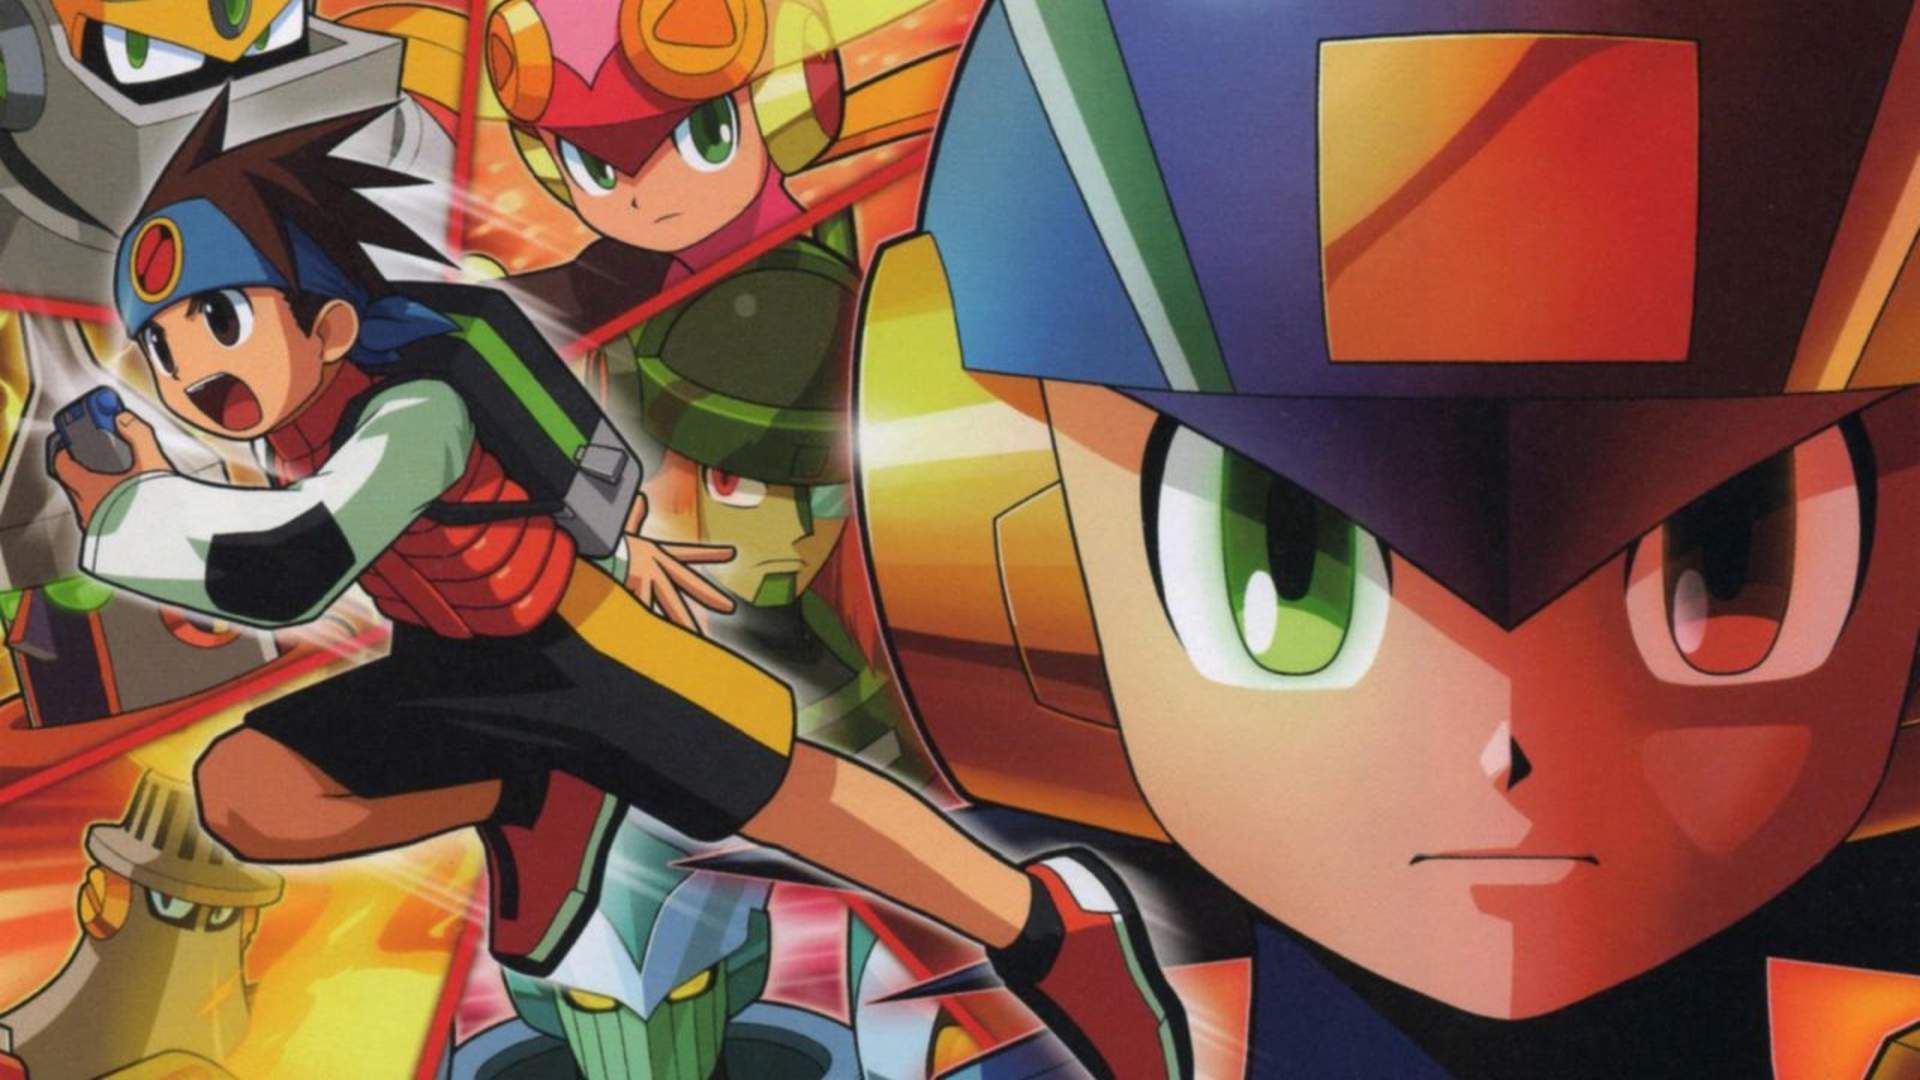 Hensama on Twitter NEW VIDEO SERIES Today I continue to look at  all the major changescensorship in MegaMan NT WarriorRockmanExe Part 2  out NOW MEGAMAN CAPCOM MegaManBattleNetwork megamanntwarrior roll  anime manga httpstco 